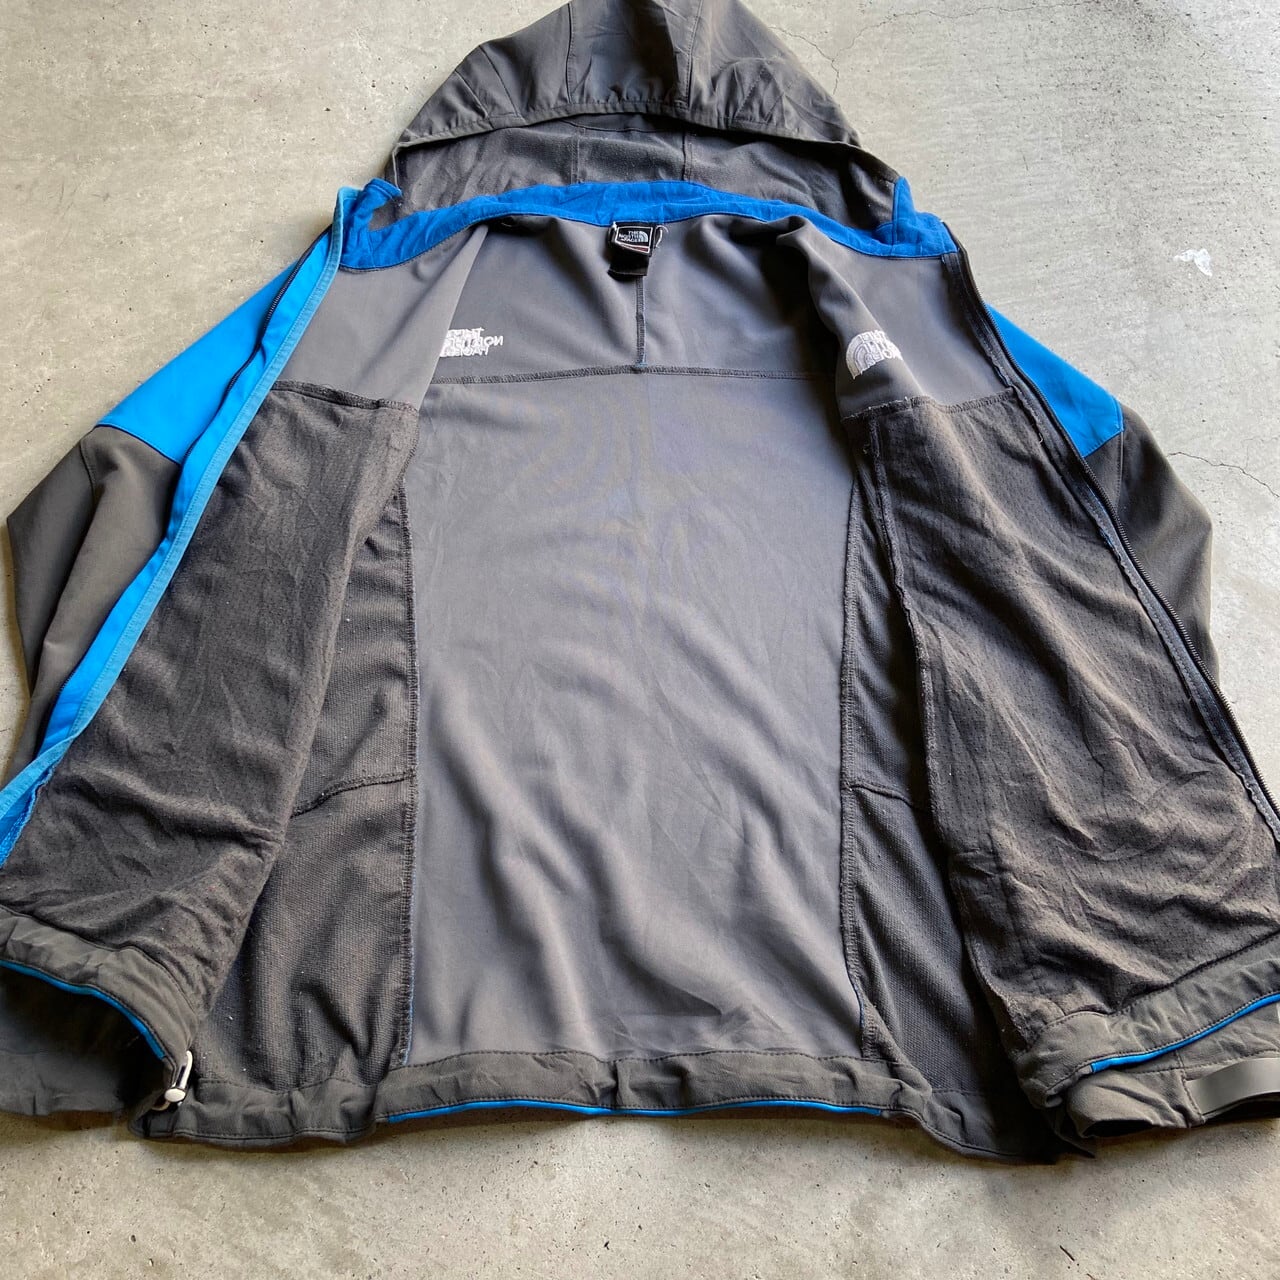 THE NORTH FACE ザ ノースフェイス SUMMIT SERIES WIND STOPPER ソフト